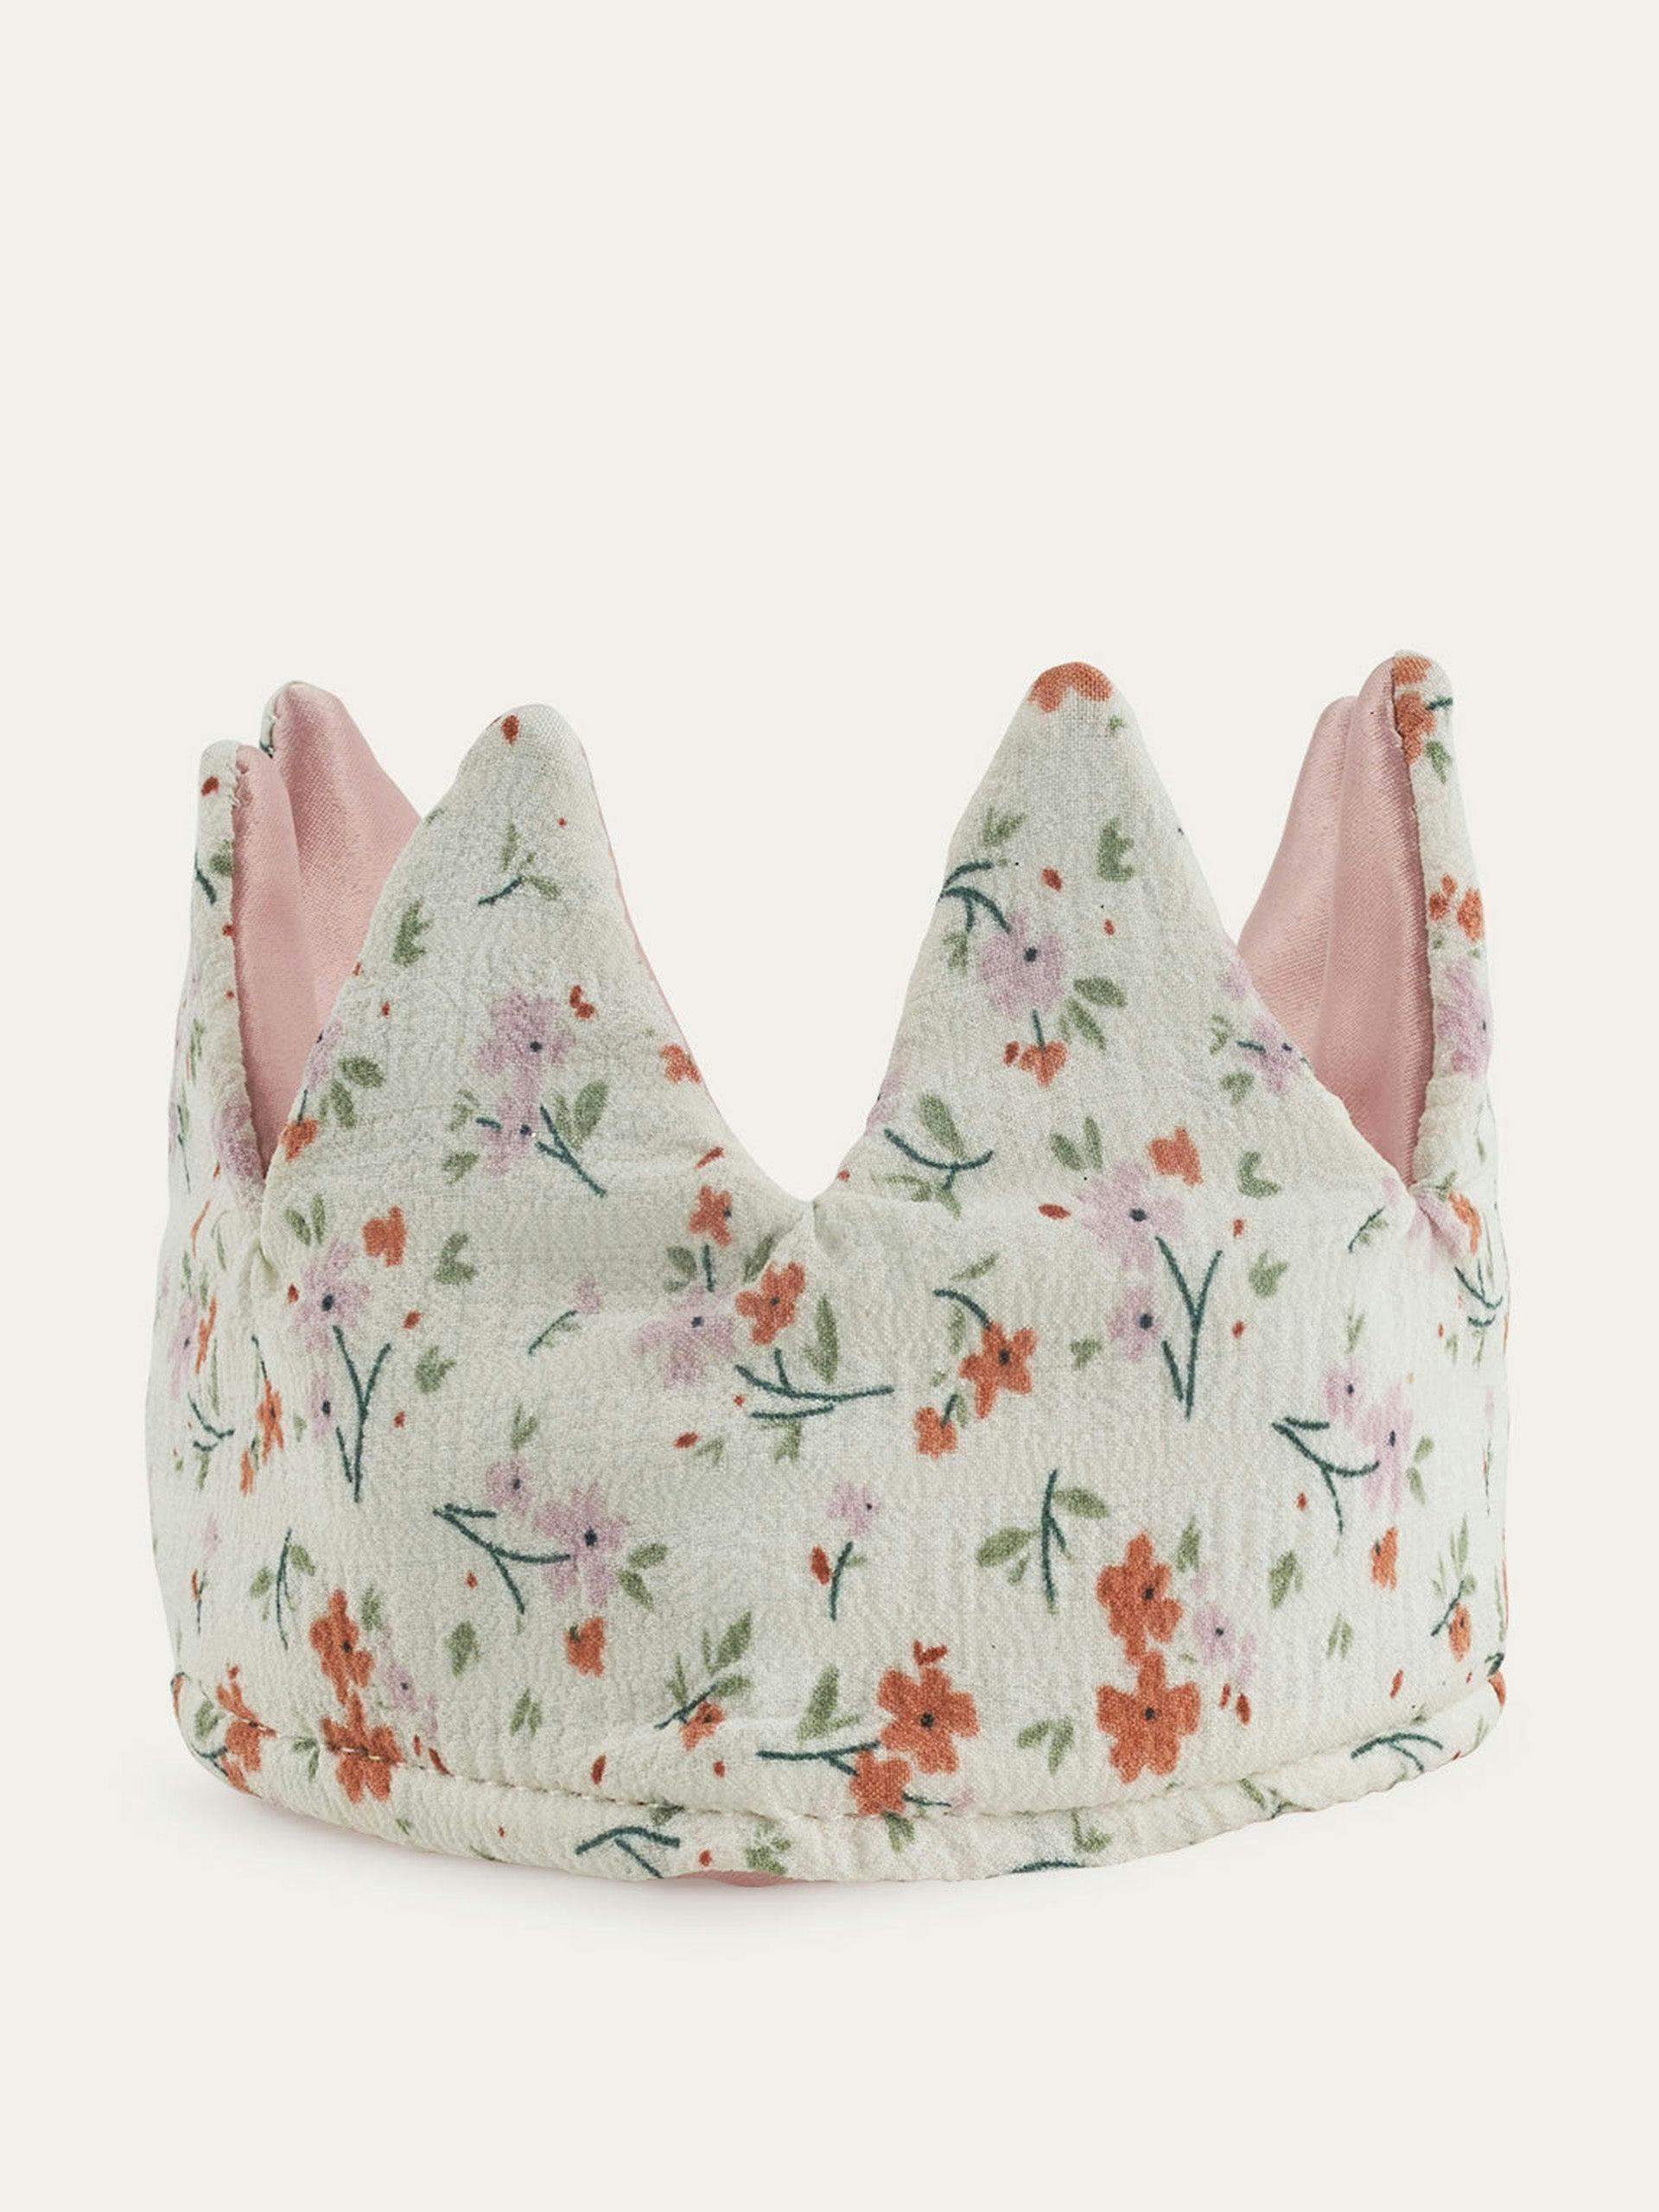 Blossom floral crown